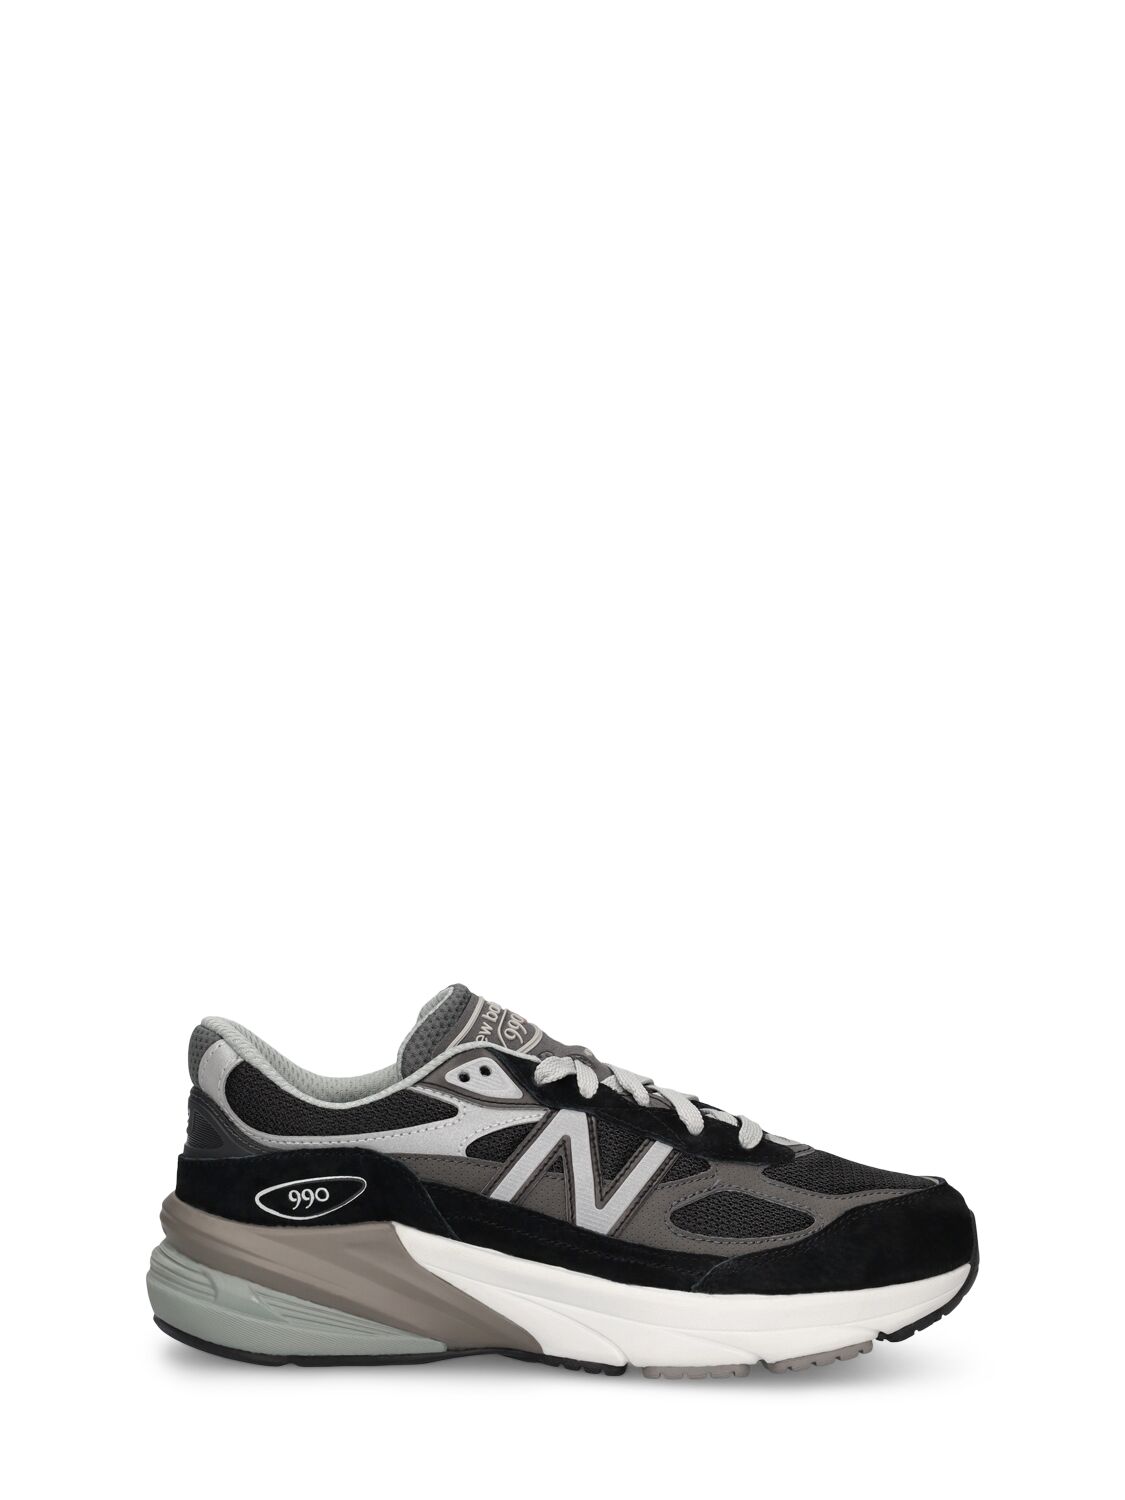 NEW BALANCE 990 V6 LEATHER & MESH trainers